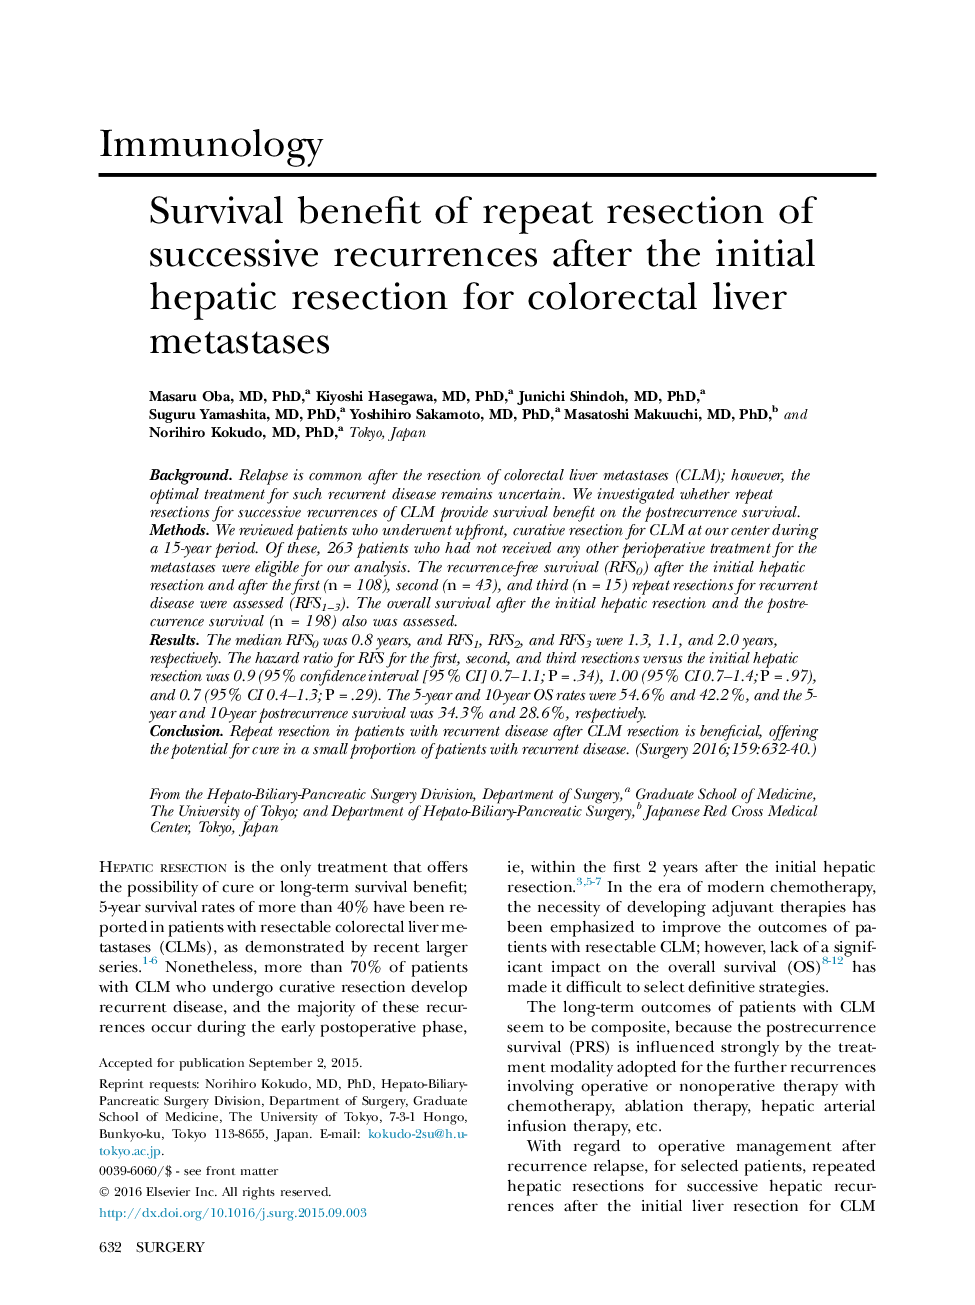 Survival benefit of repeat resection of successive recurrences after the initial hepatic resection for colorectal liver metastases